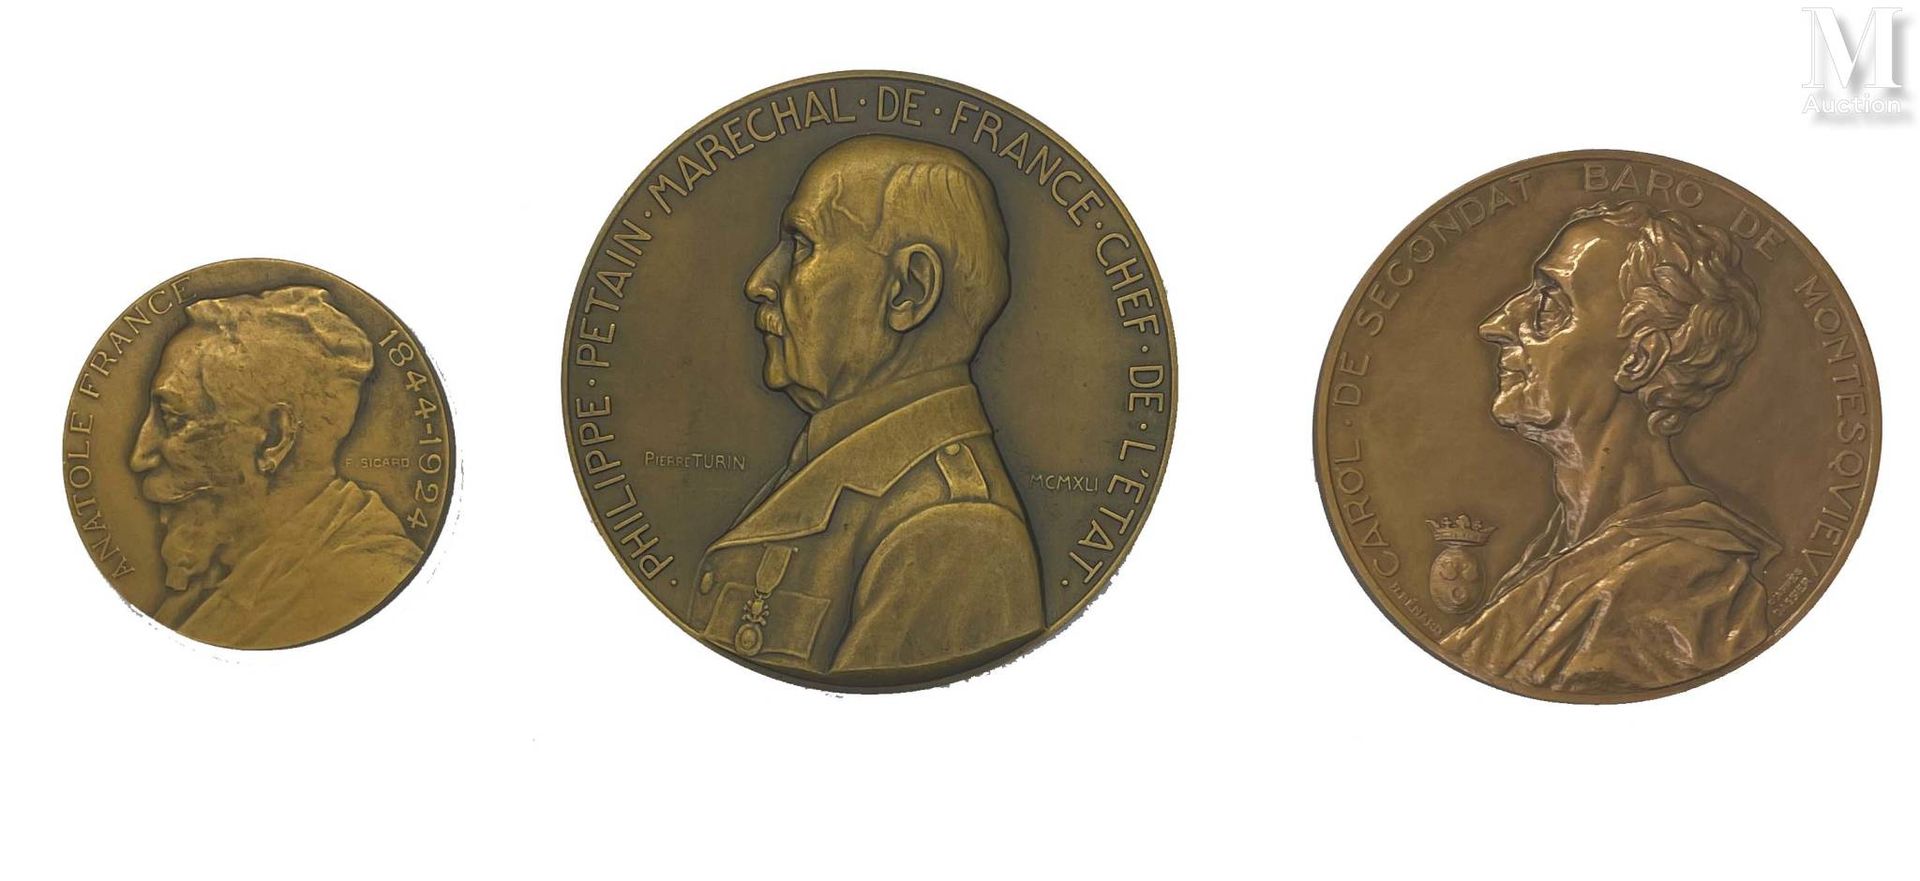 FRANCE - DIVERS "Lot of three bronze medals commemorating :

-Philippe Pétain "H&hellip;